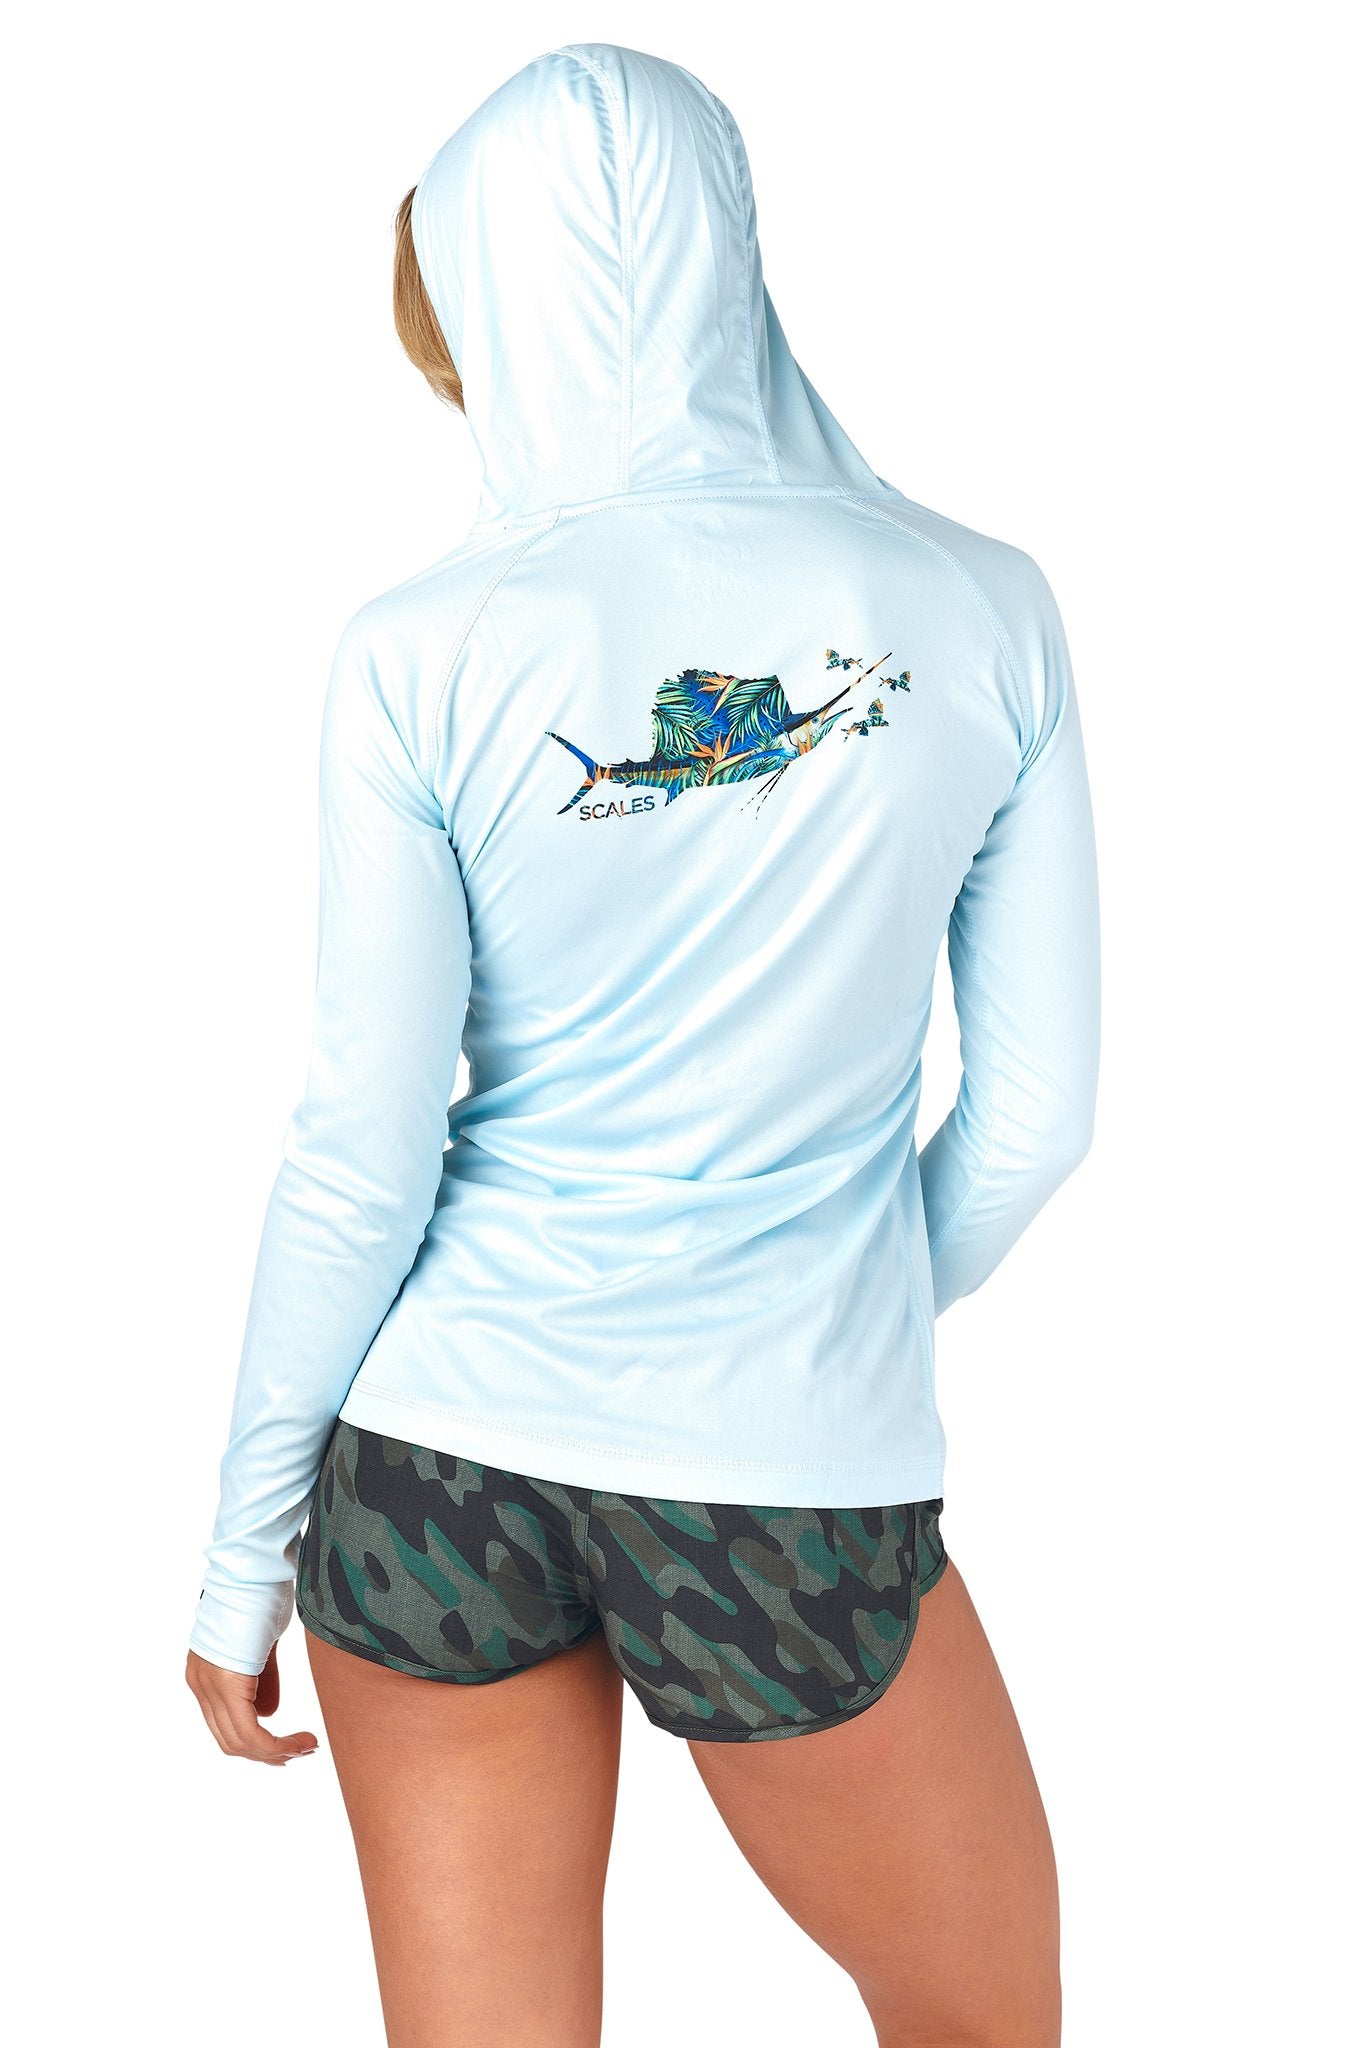 Scales Women's Fly Sail Pro Performance Hooded Shirt Blue Size - Large